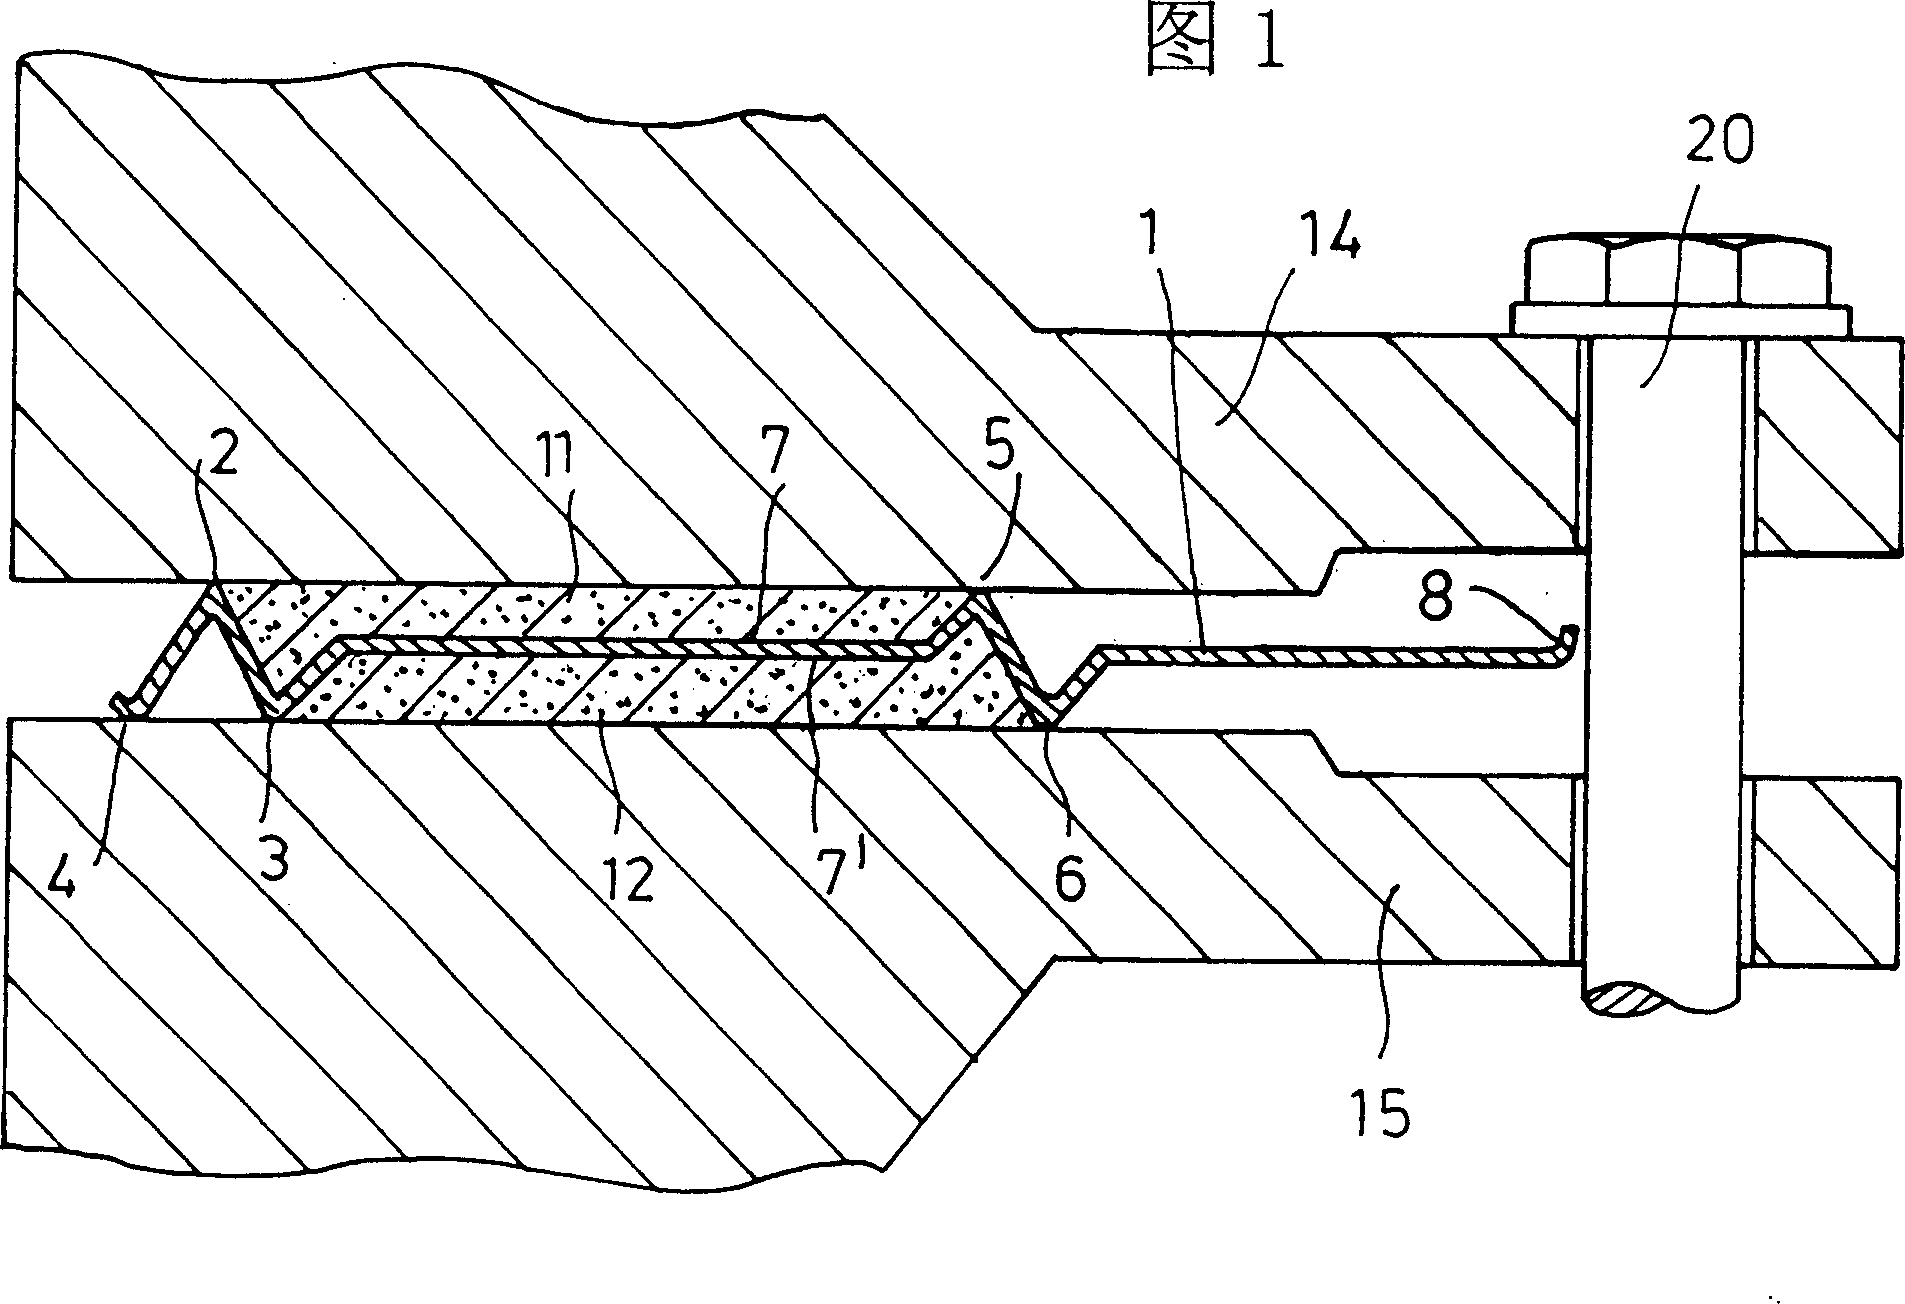 Stamped sealing arrangement for flat flanged joint